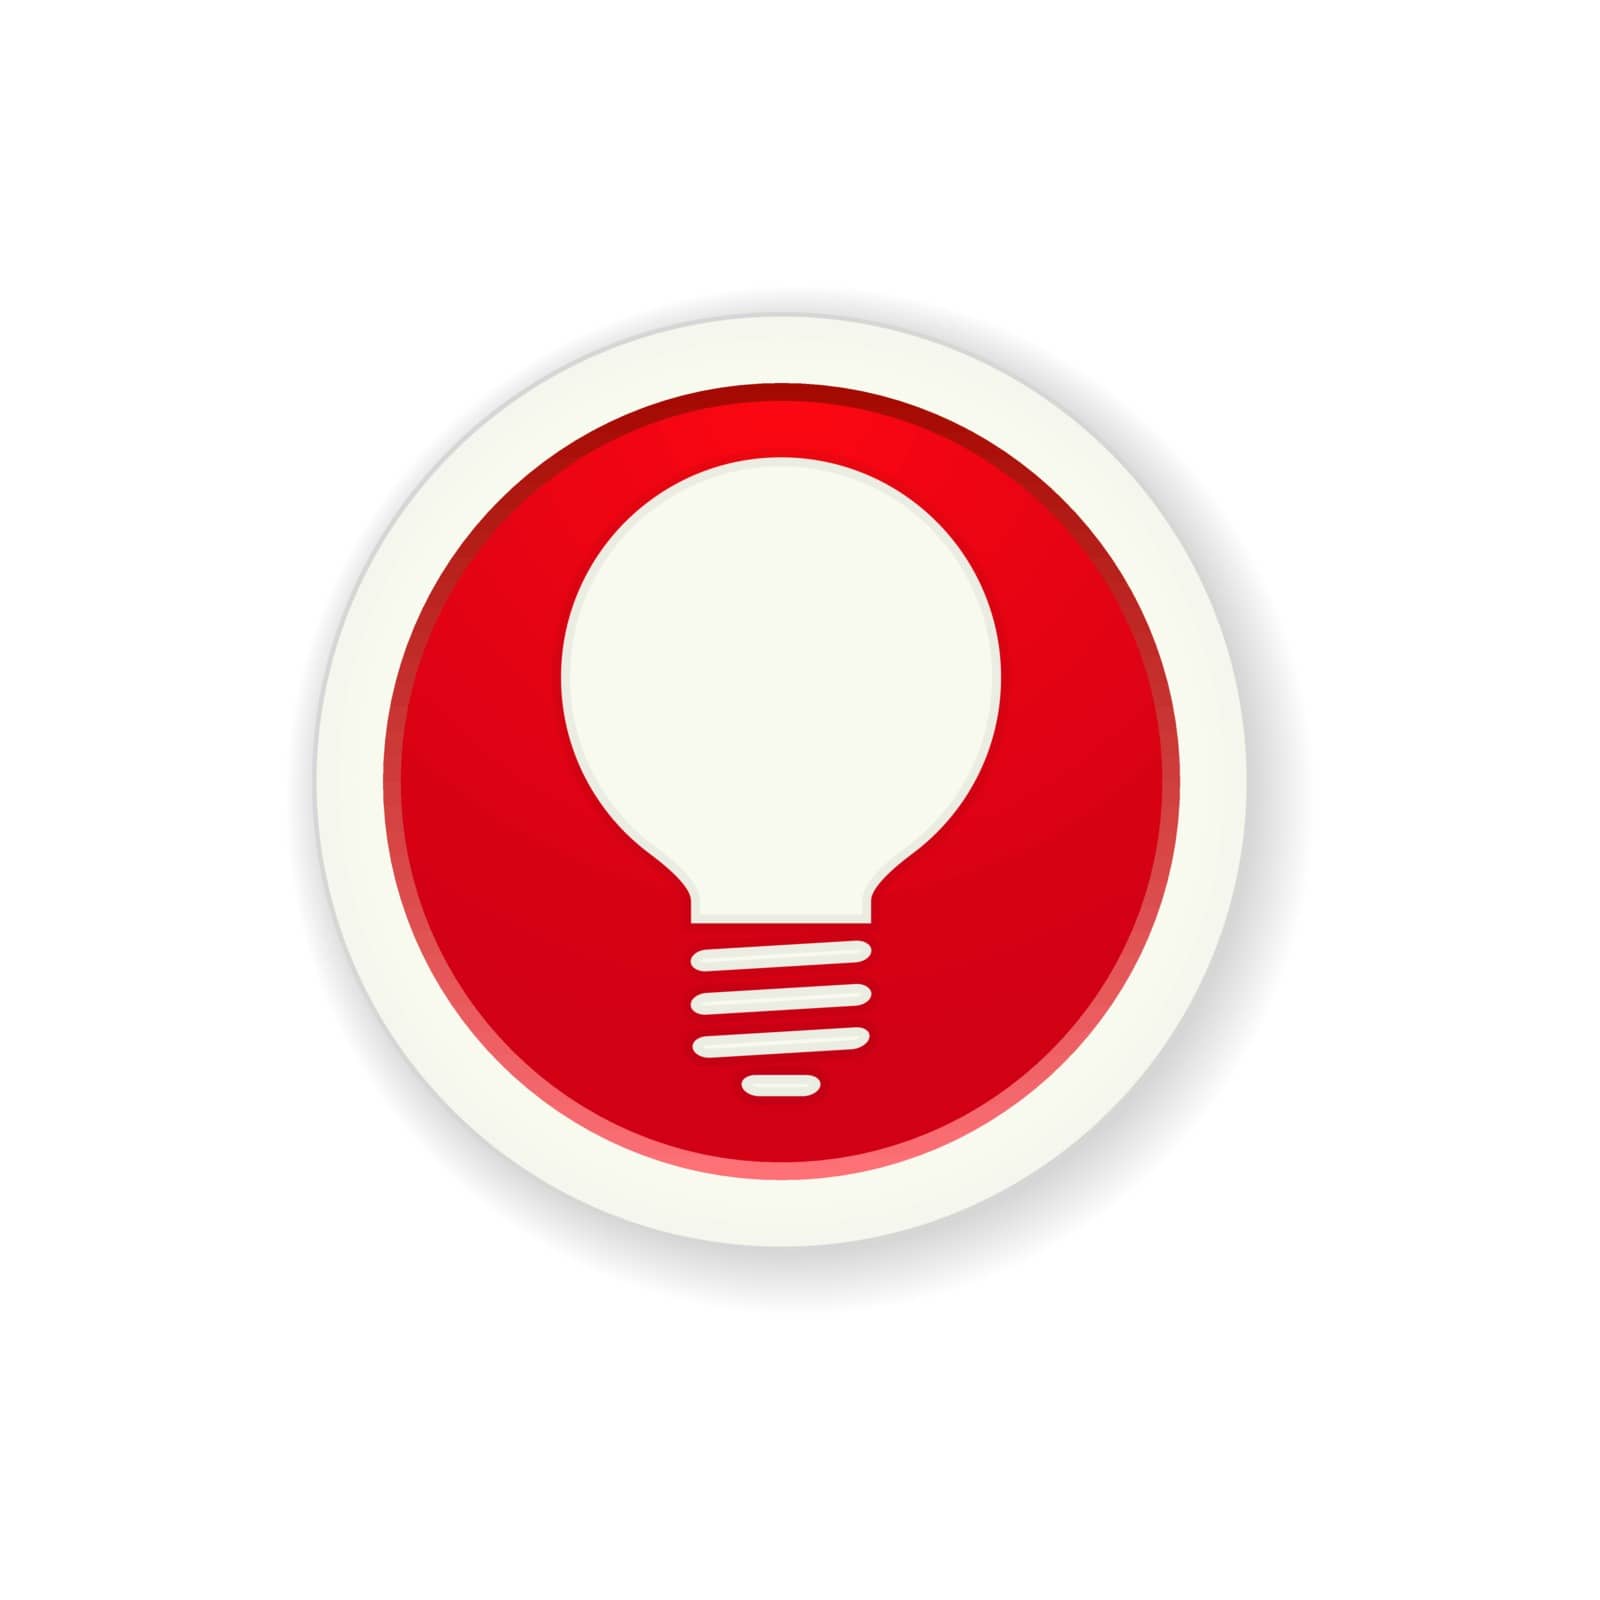 the red glossy circle button with bulb pictogram by madtom